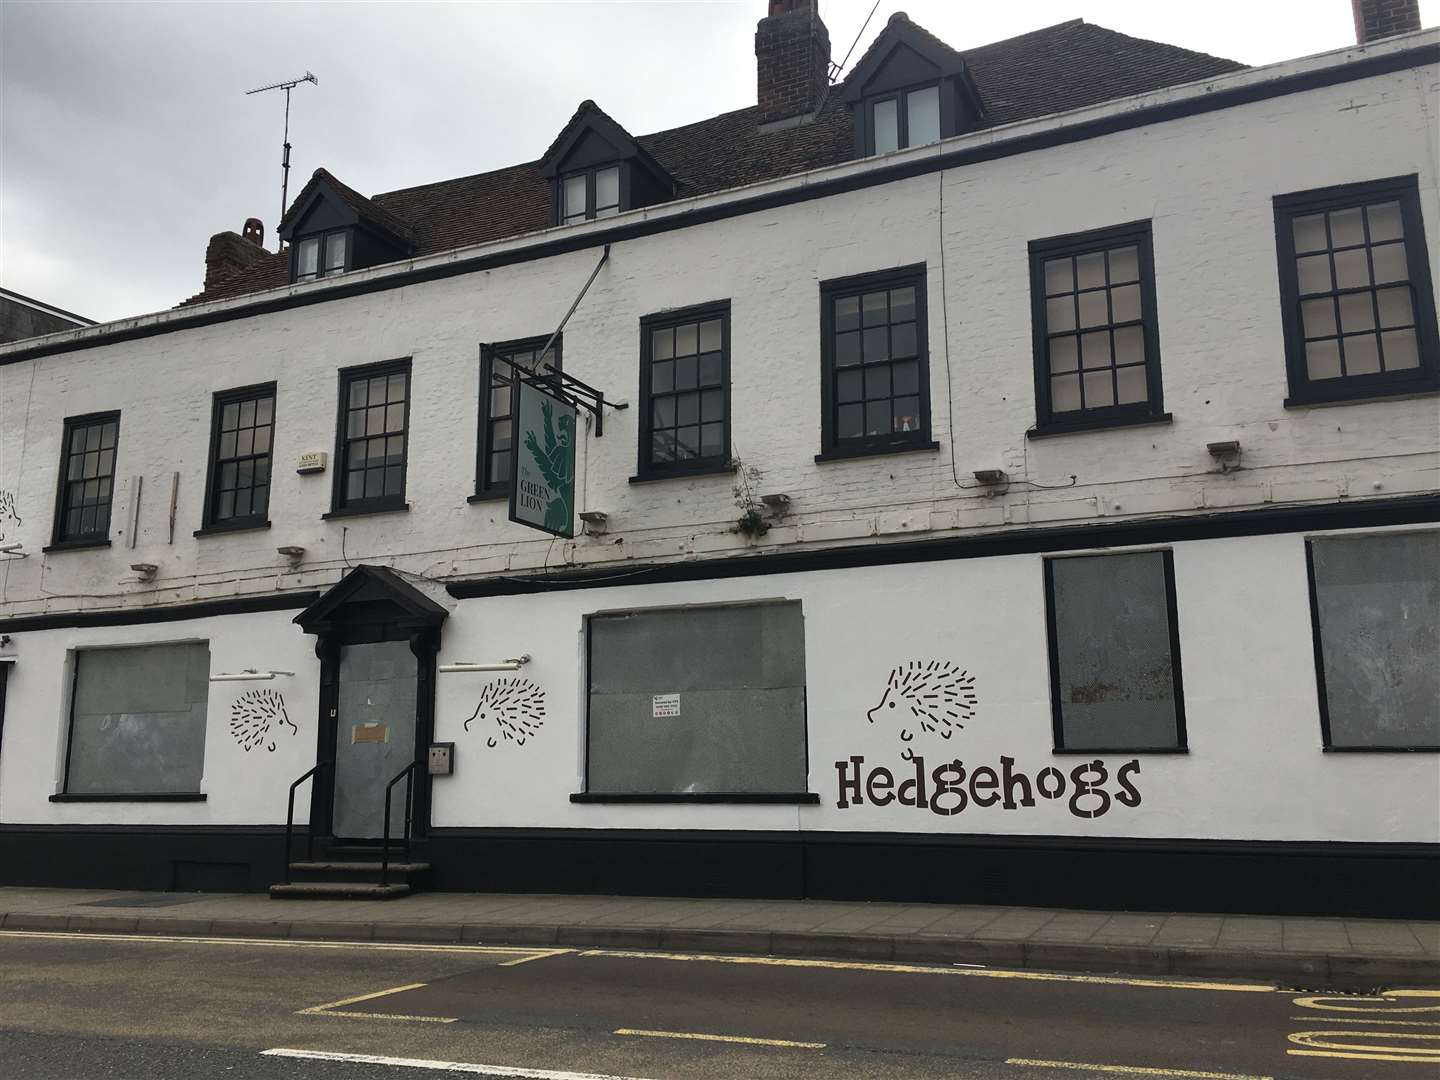 The Hedgehogs nursery had plans to move into the former Green Lion pub in Rainham